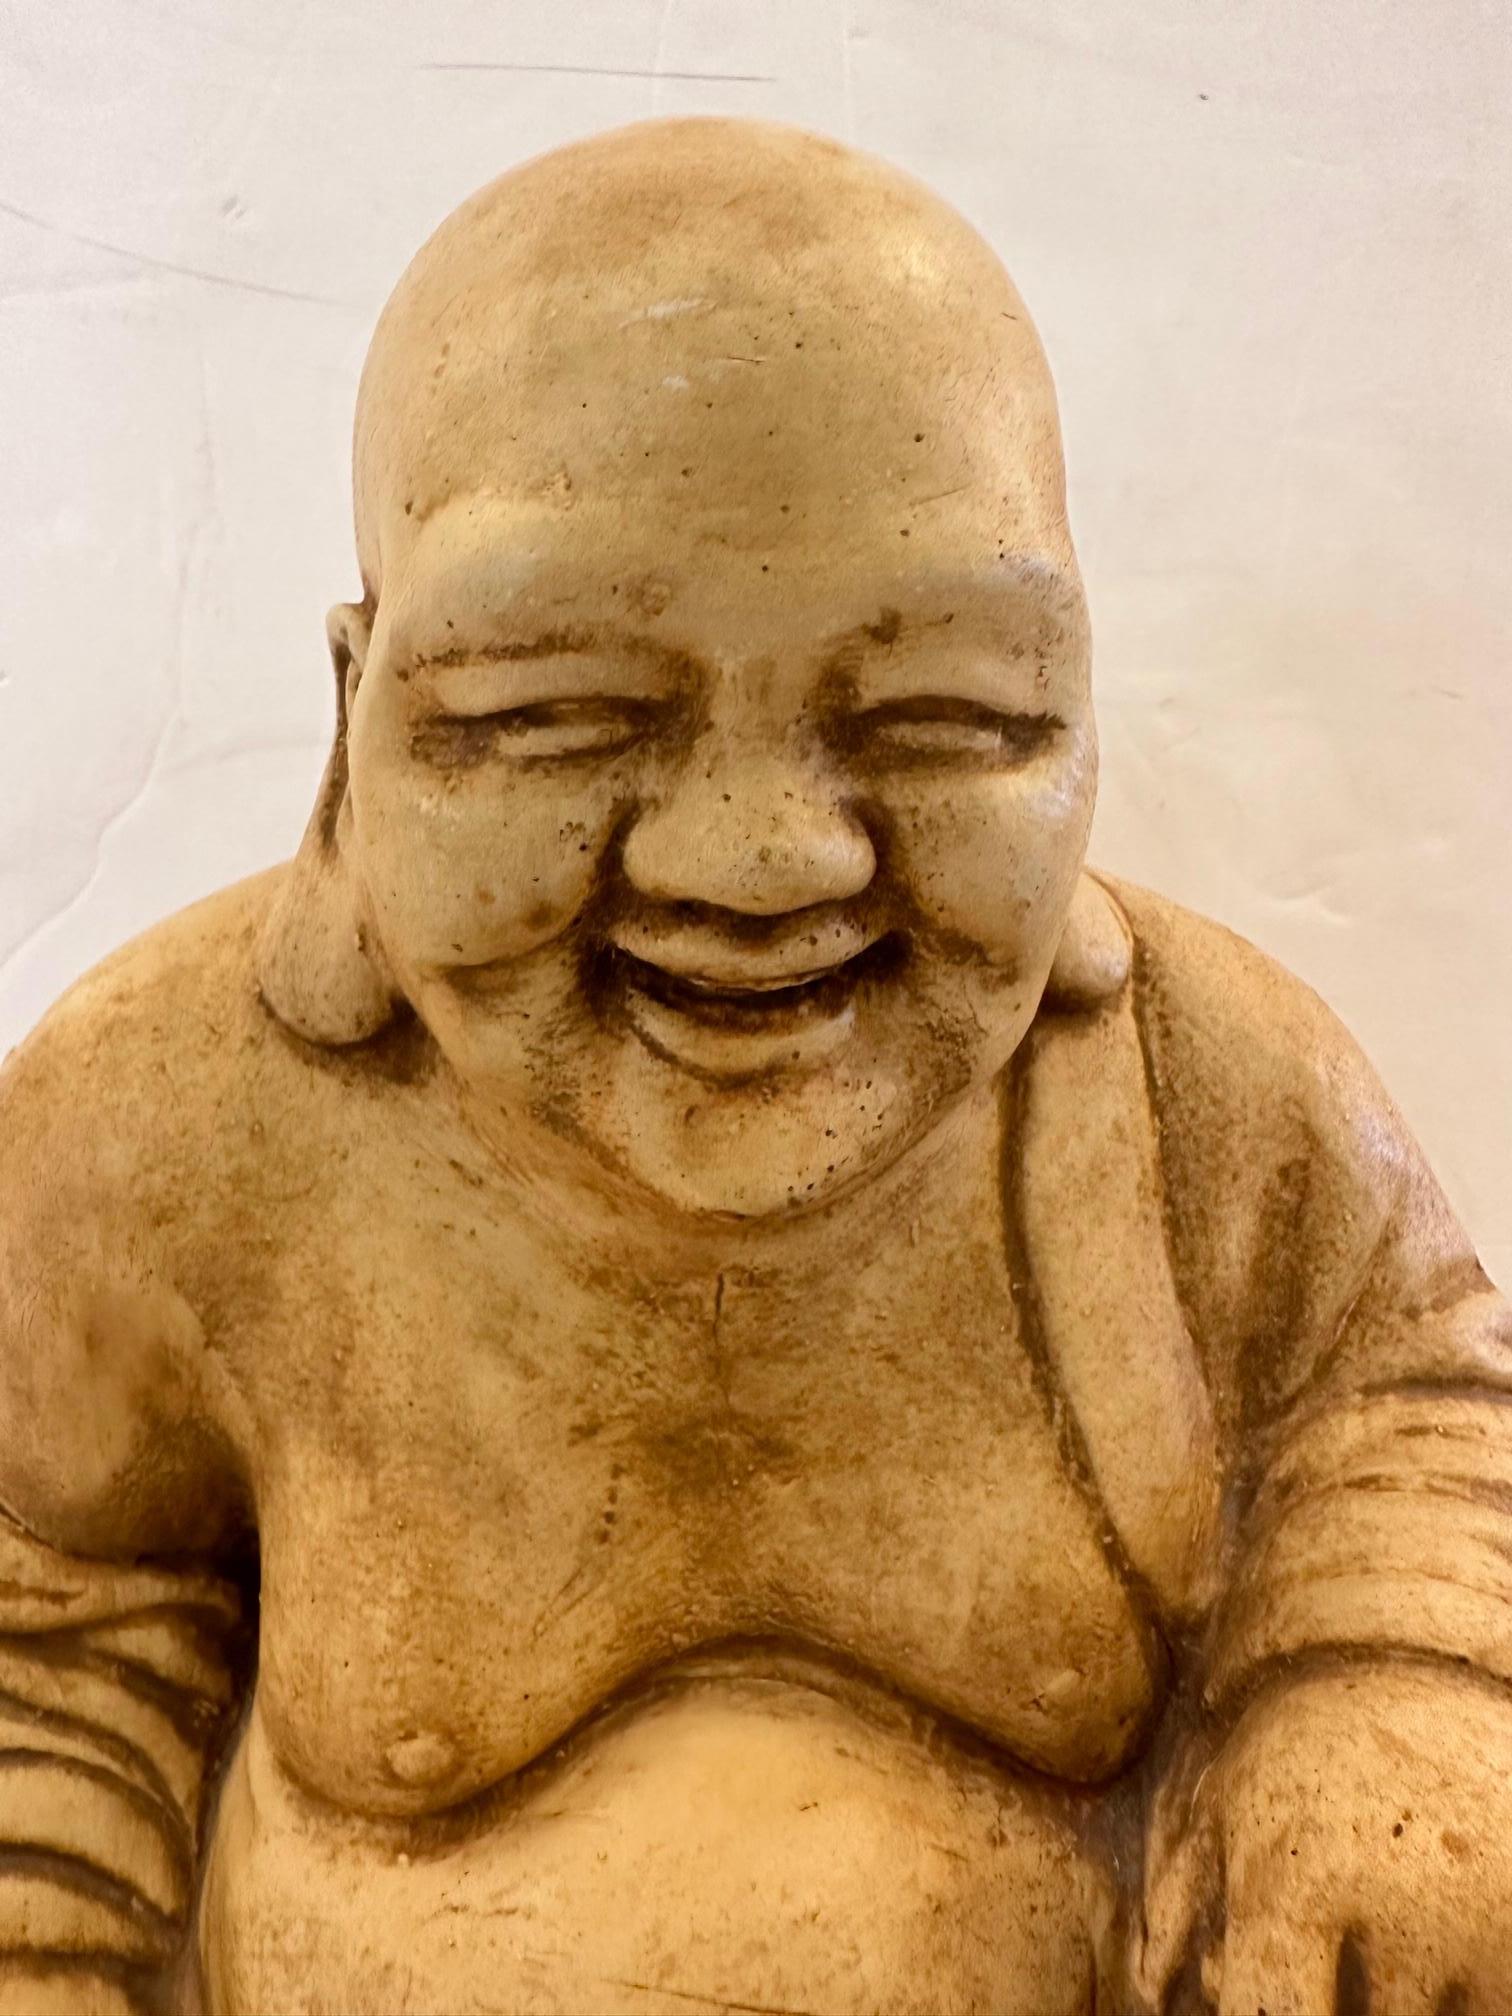 Irresistible cast stone seated Buddha sculpture having a jolly expression and meticulous detail.